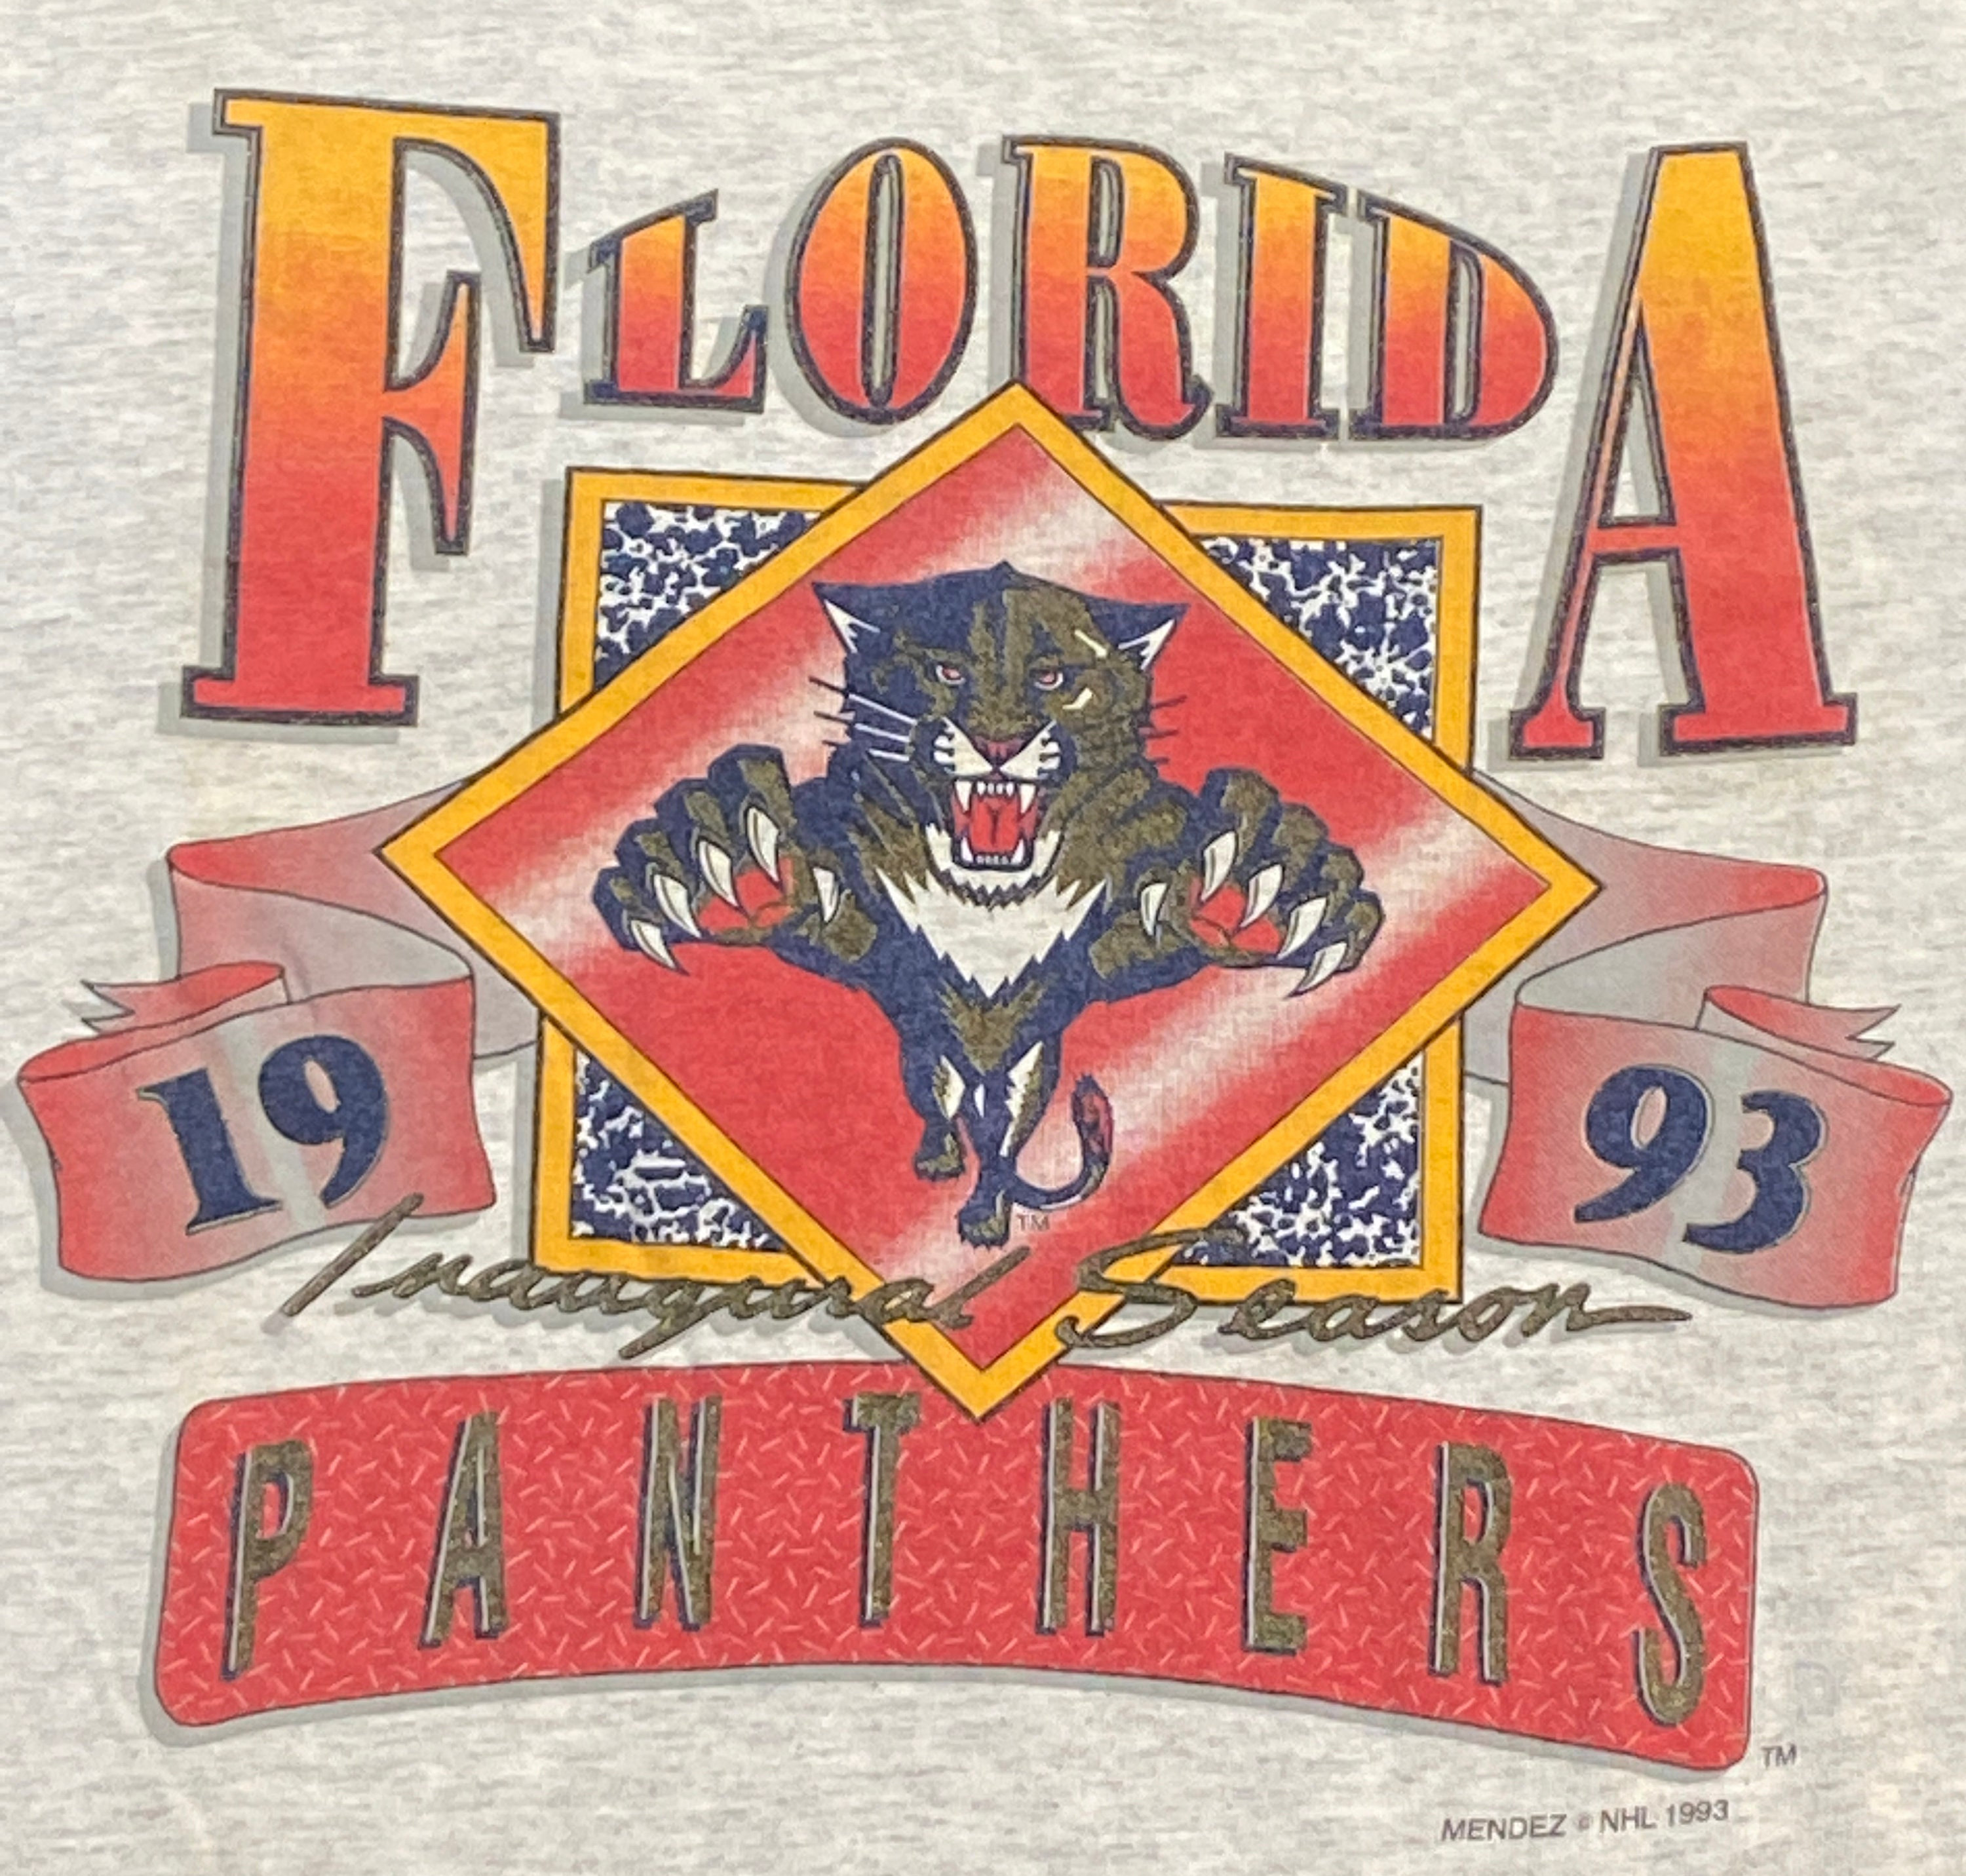 Vintage Florida Panthers T Shirt Tee Sherry's Best Size 